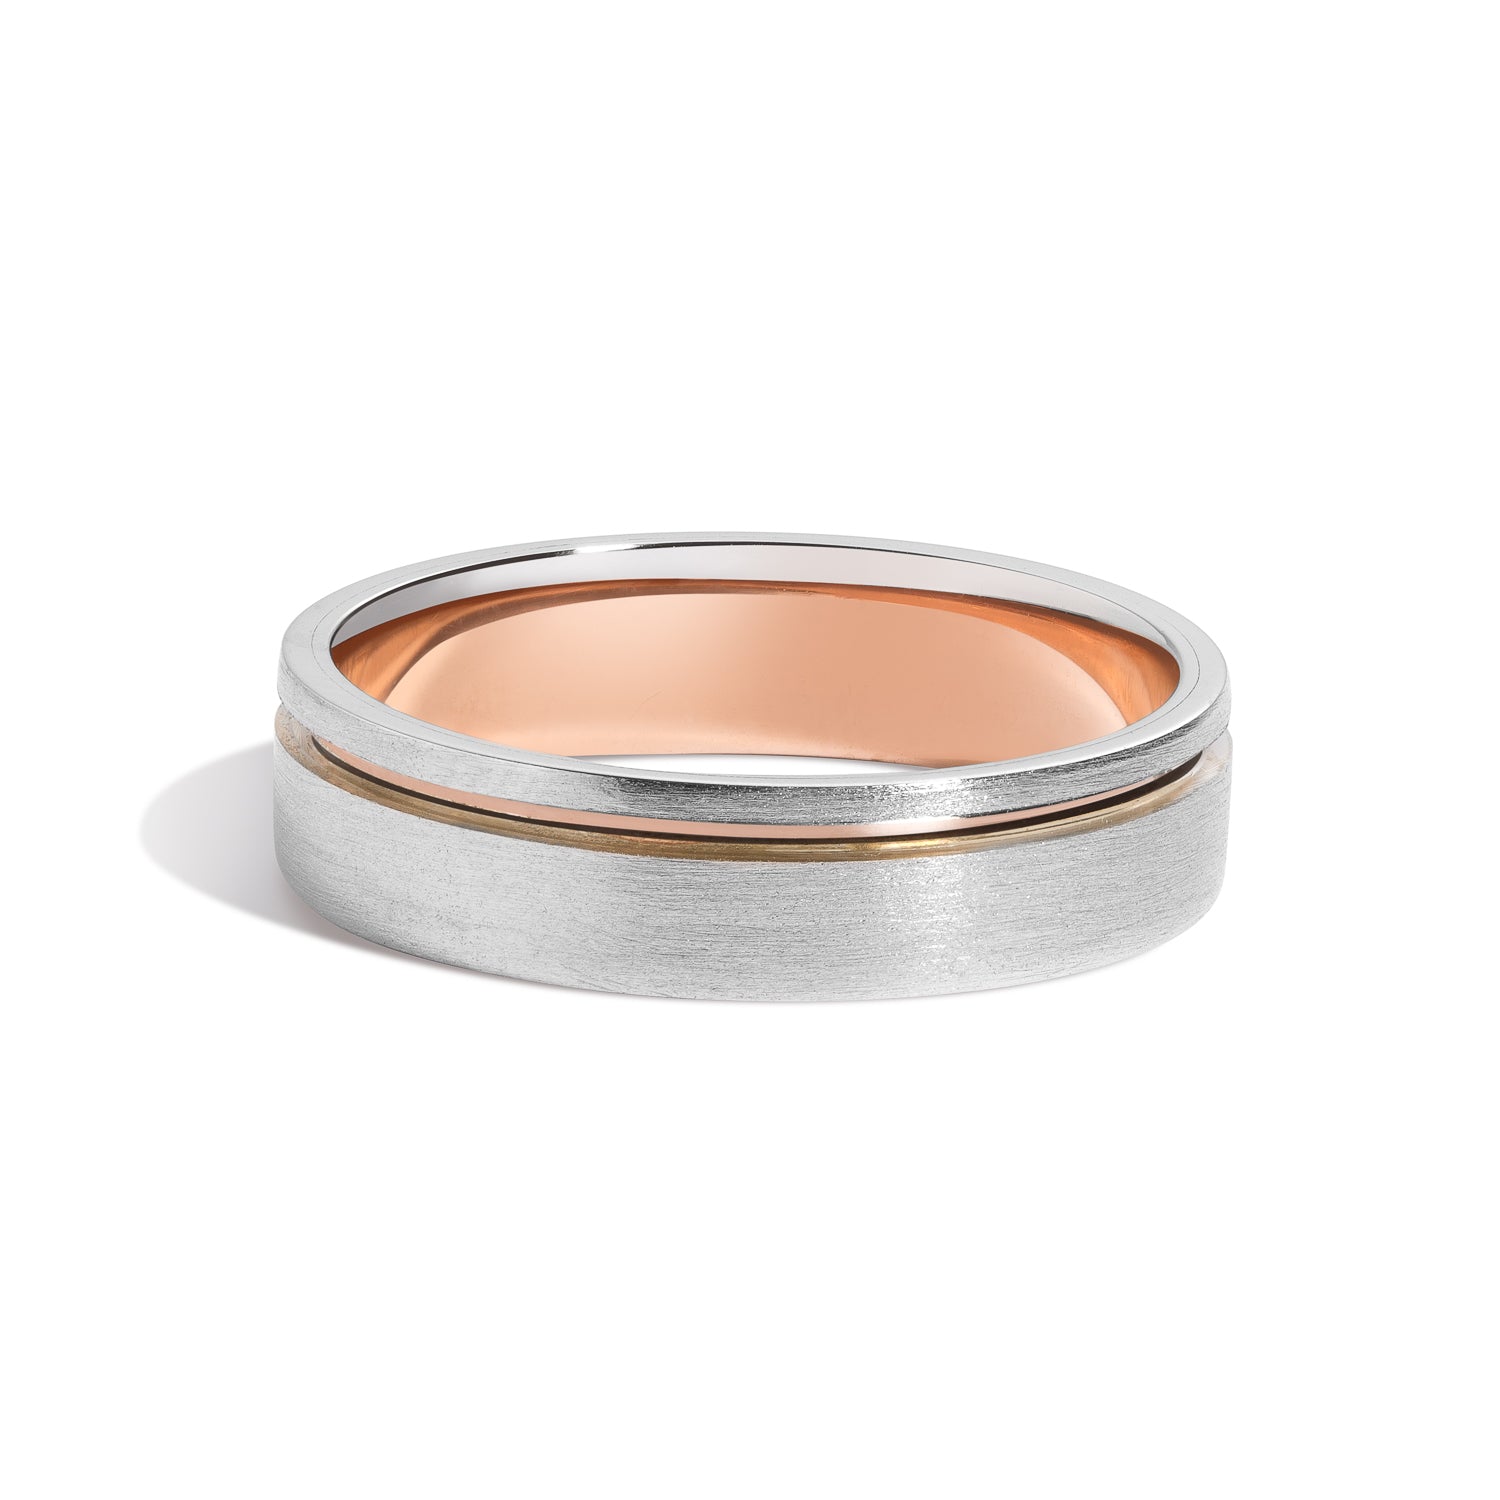 Shahla Karimi Jewelry Every Love 14K Gold Groove Band White and Rose Gold